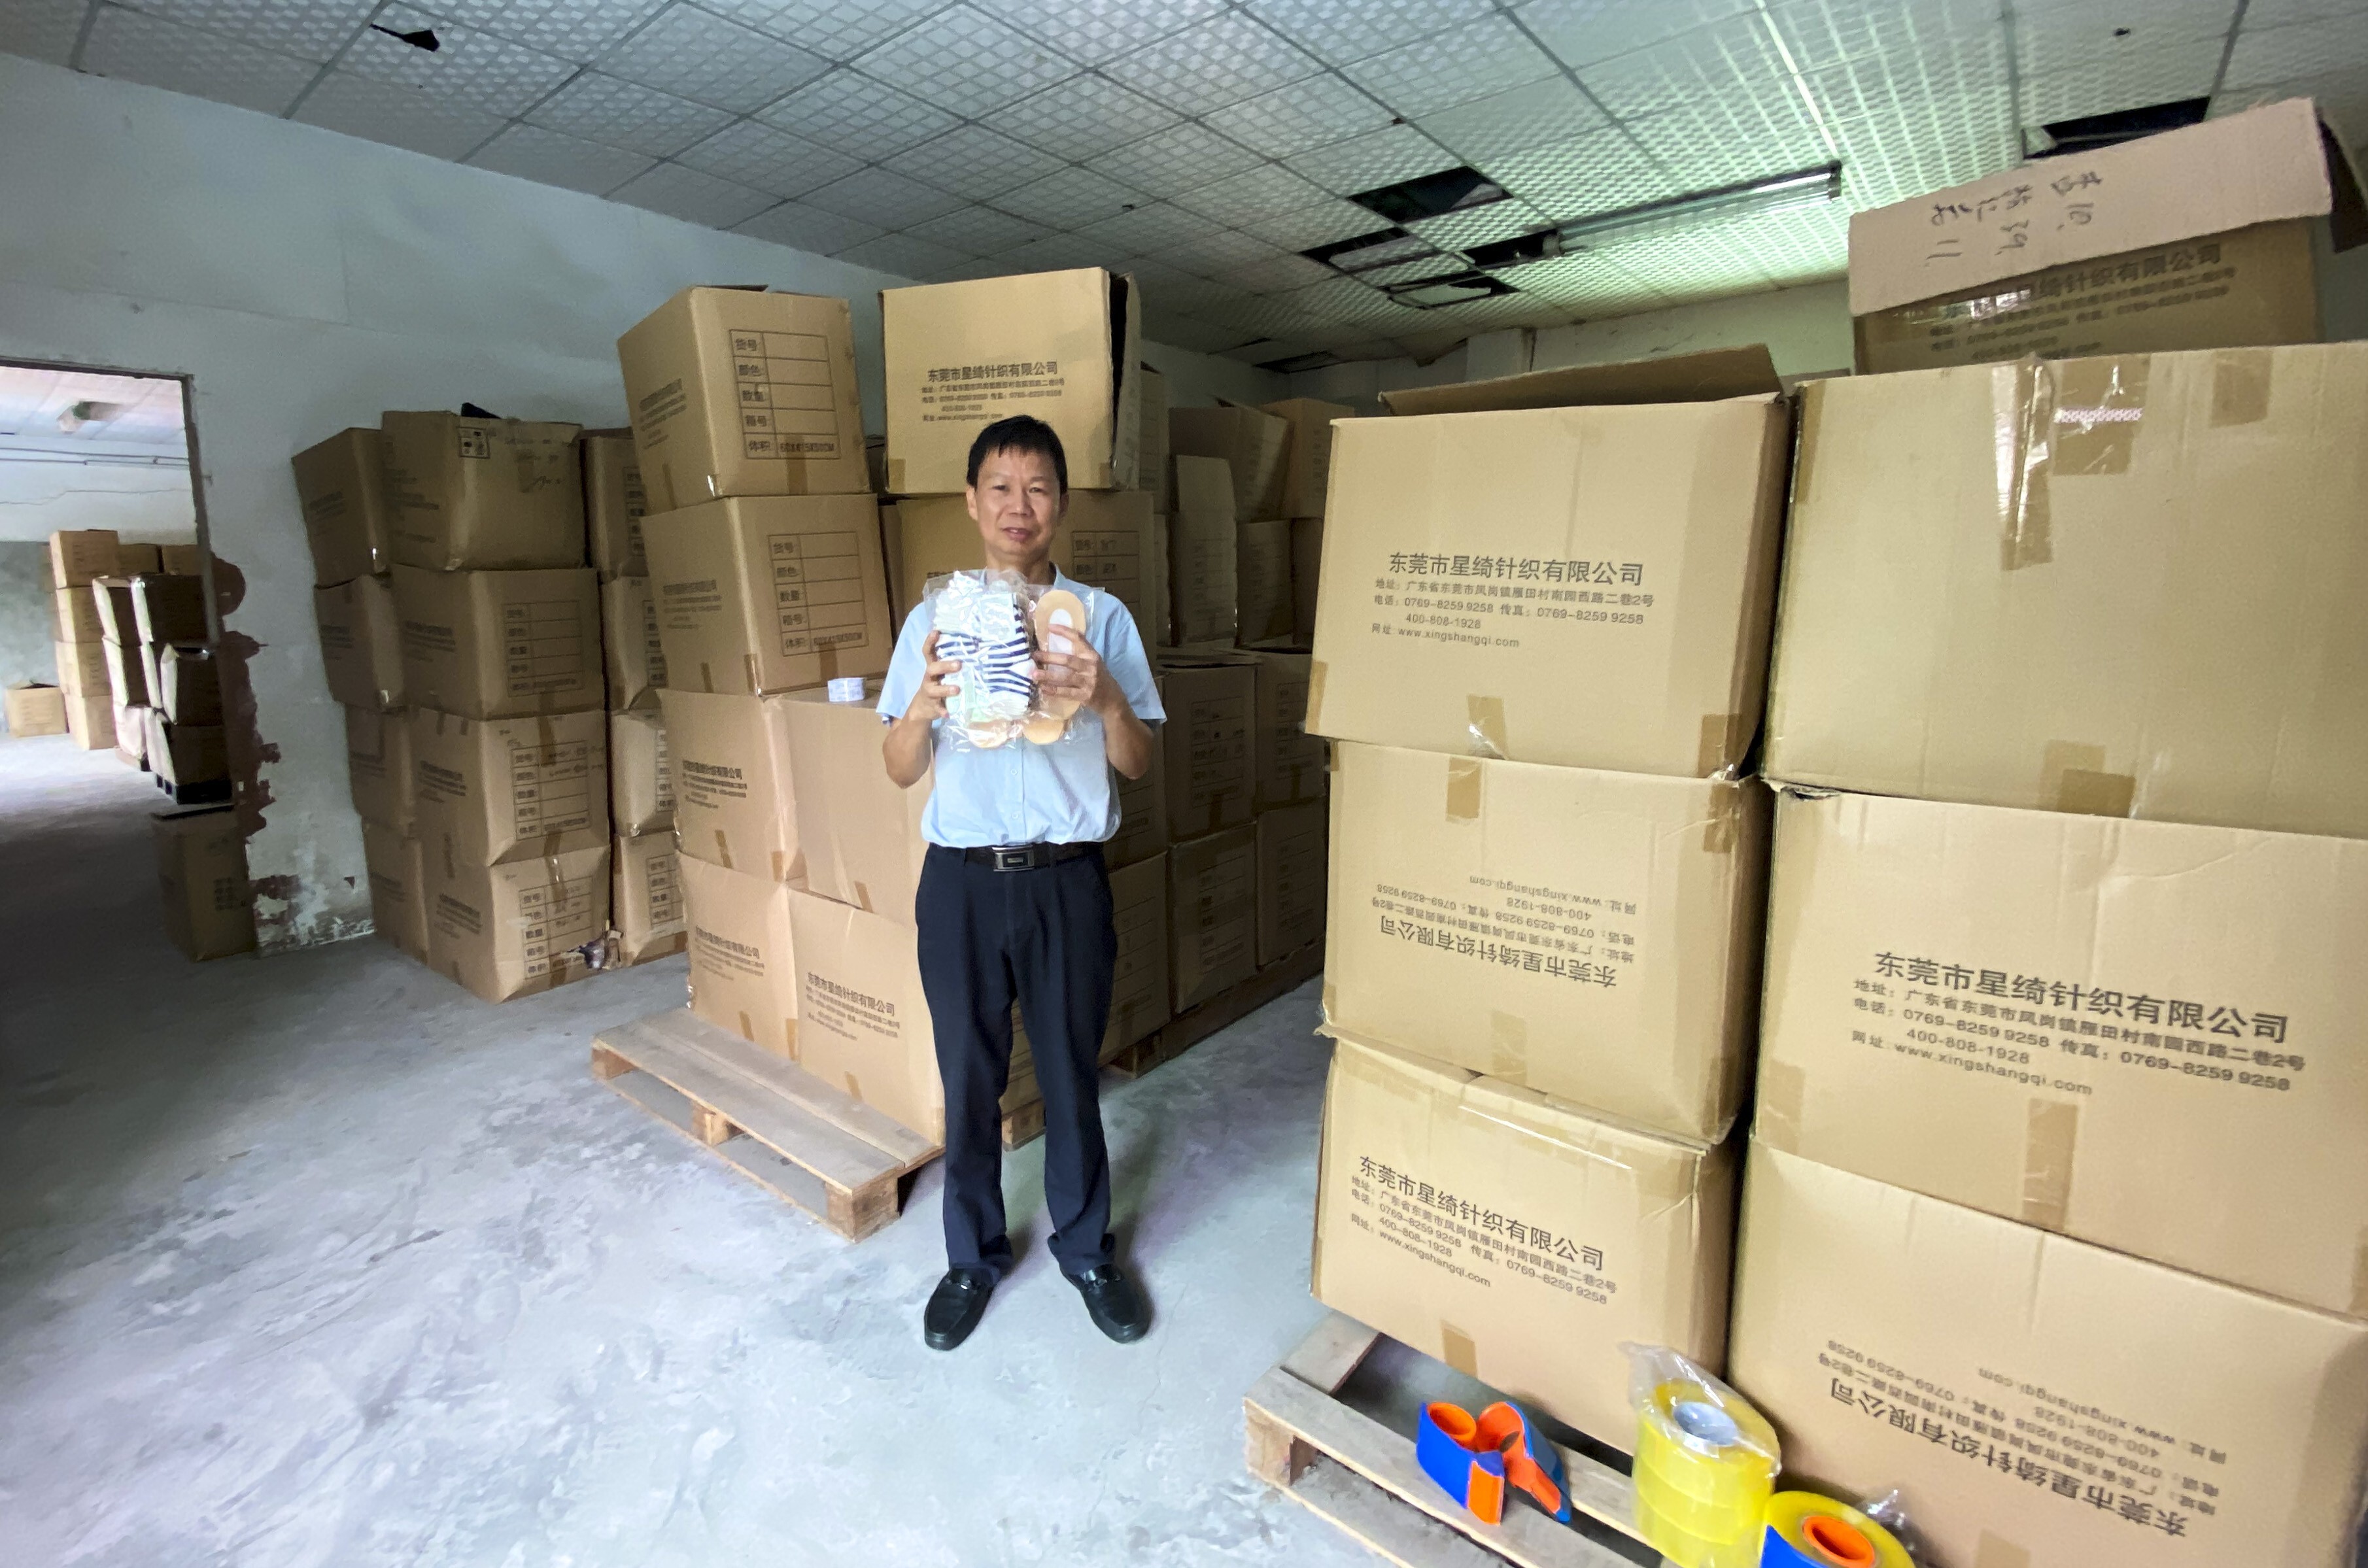 After nearly three decades, Lin Danru, 54, fears that his sock factory is running on borrowed time. Export orders have dried up amid the coronavirus pandemic. Domestic sales have plunged. And frankly, none of his five daughters want anything to do with the antiquated manufacturing business model. Photo: He Huifeng